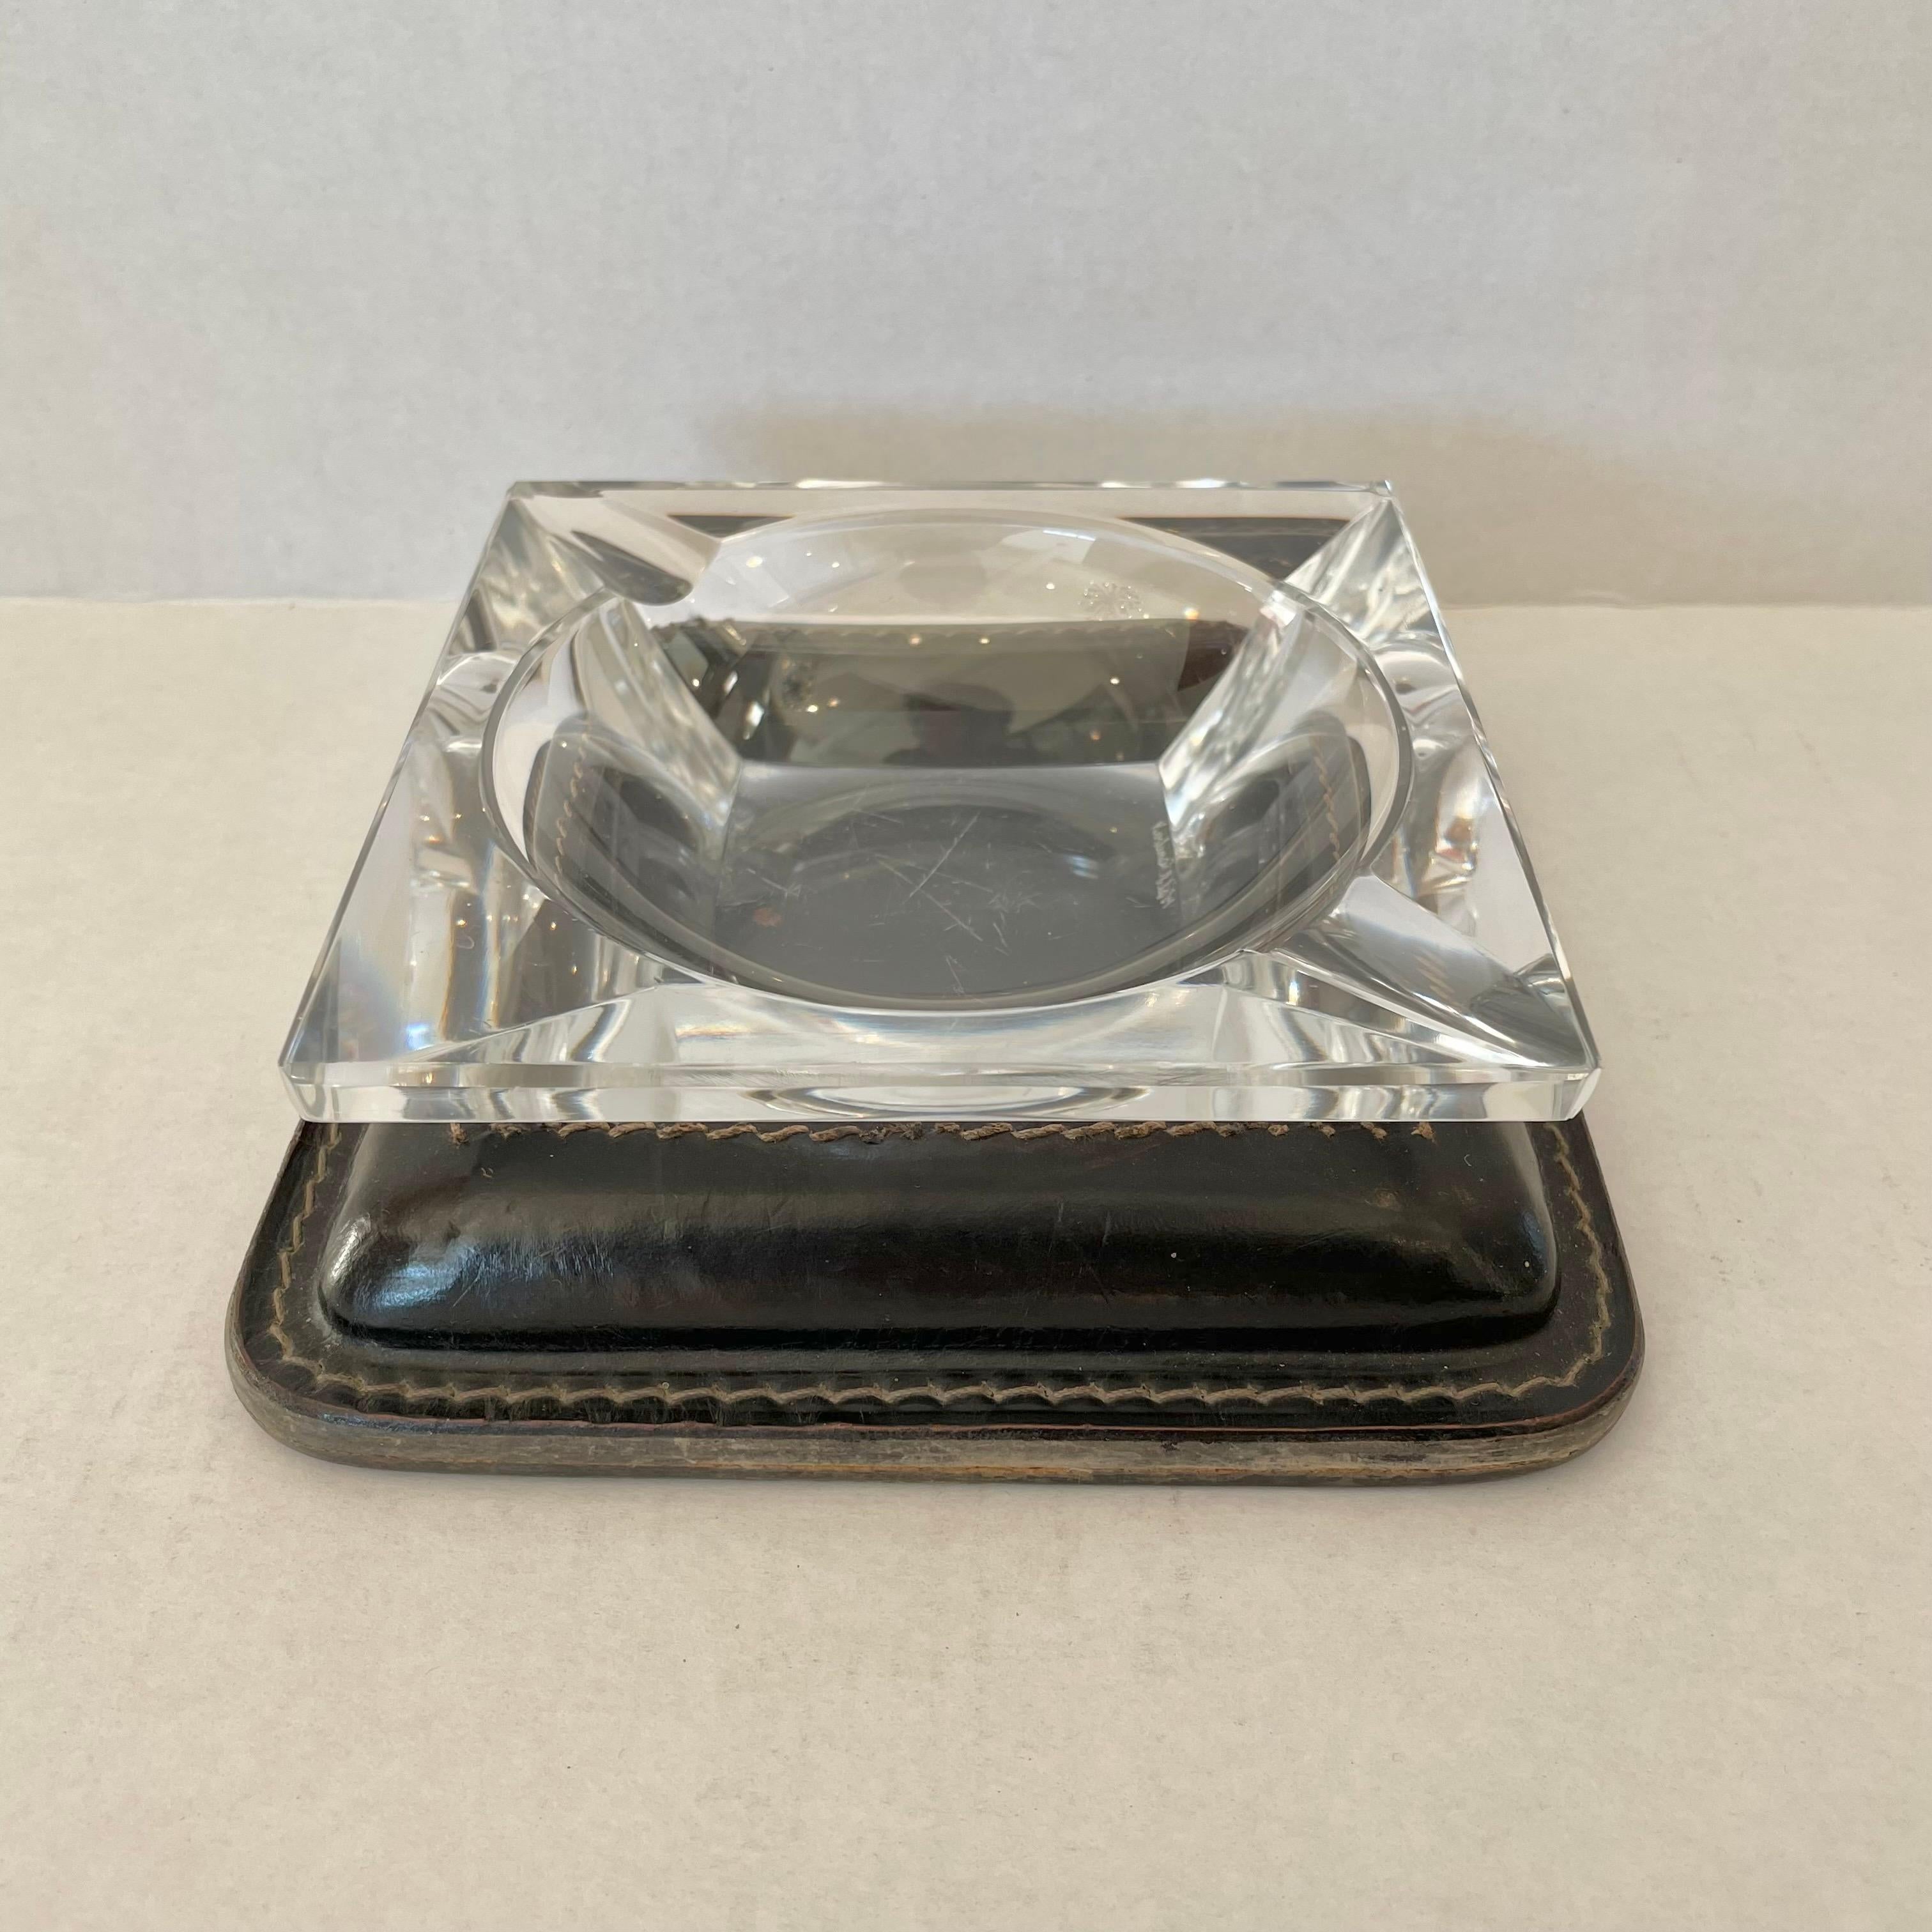 Classic leather and glass catchall / ashtray by French designer Jacques Adnet. Rich black leather base with signature Adnet contrast stitching and a circular inset cutout. Crystal glass with circular base sits nicely inside with two cigarette